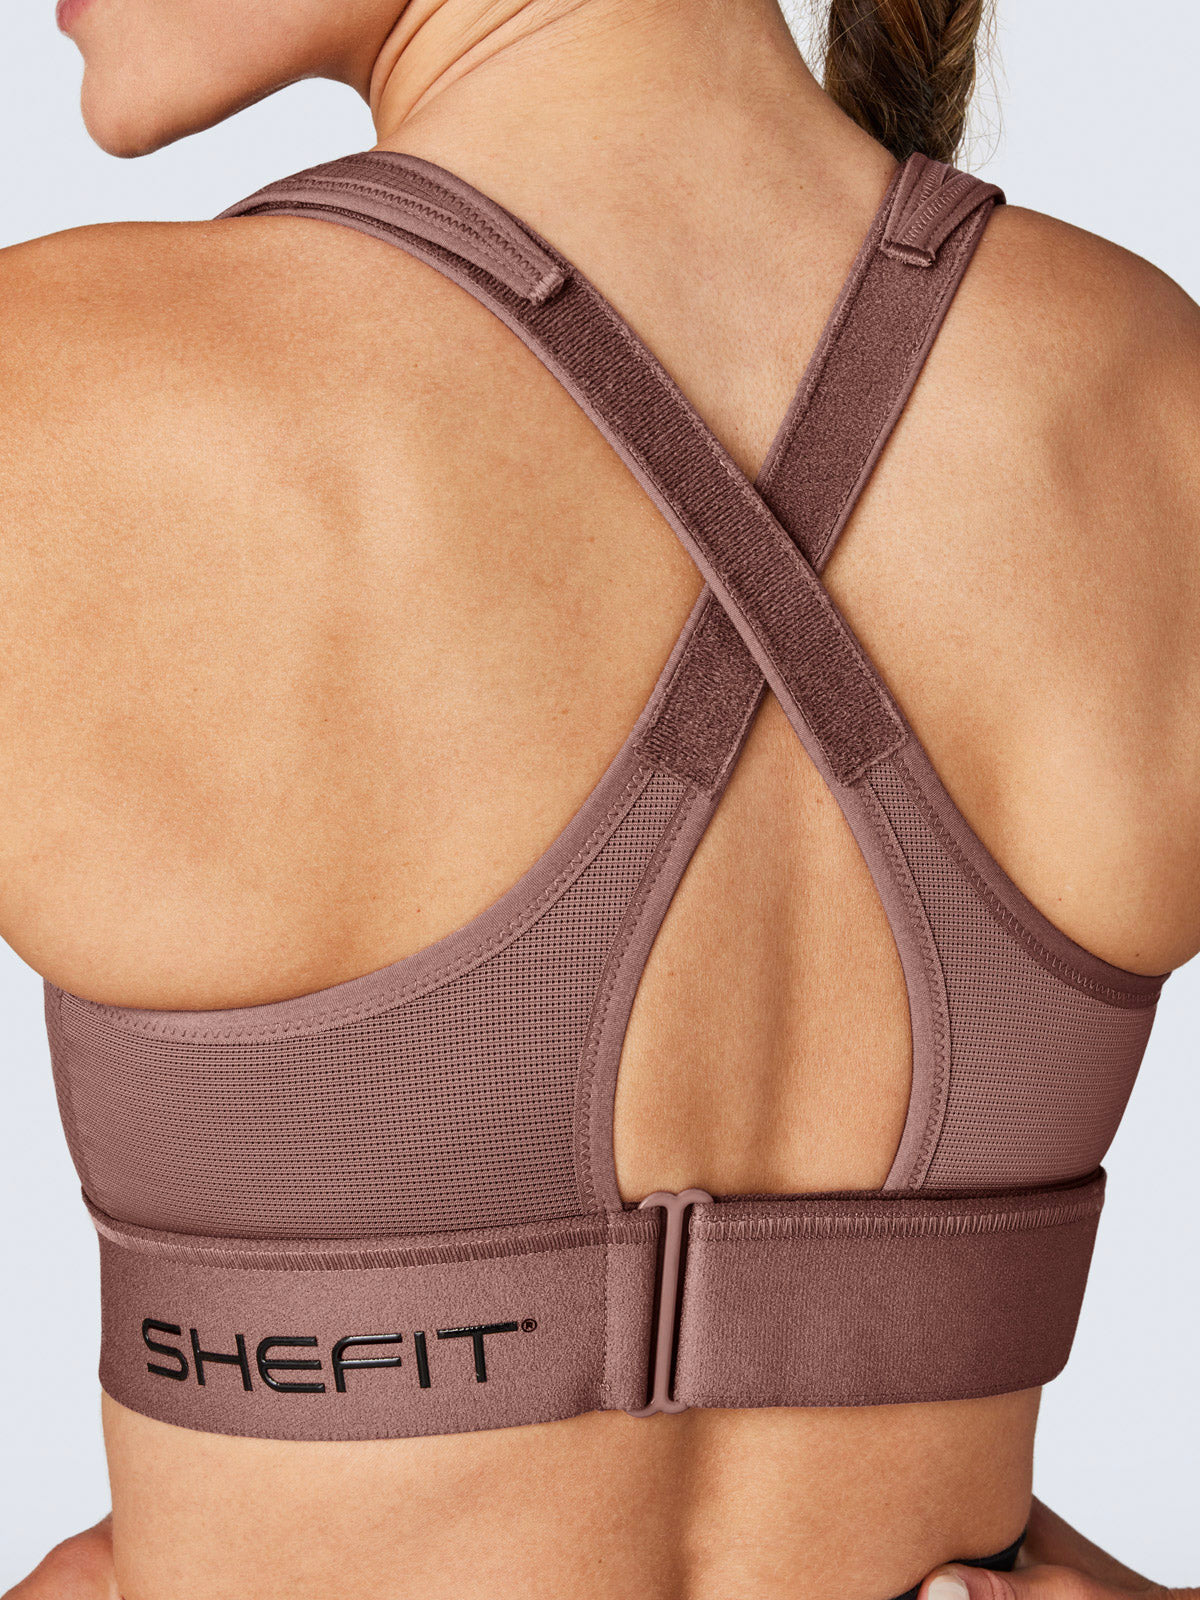 Multicolor Shefit Ultimate Sports Bra 2Luxe for High Impact